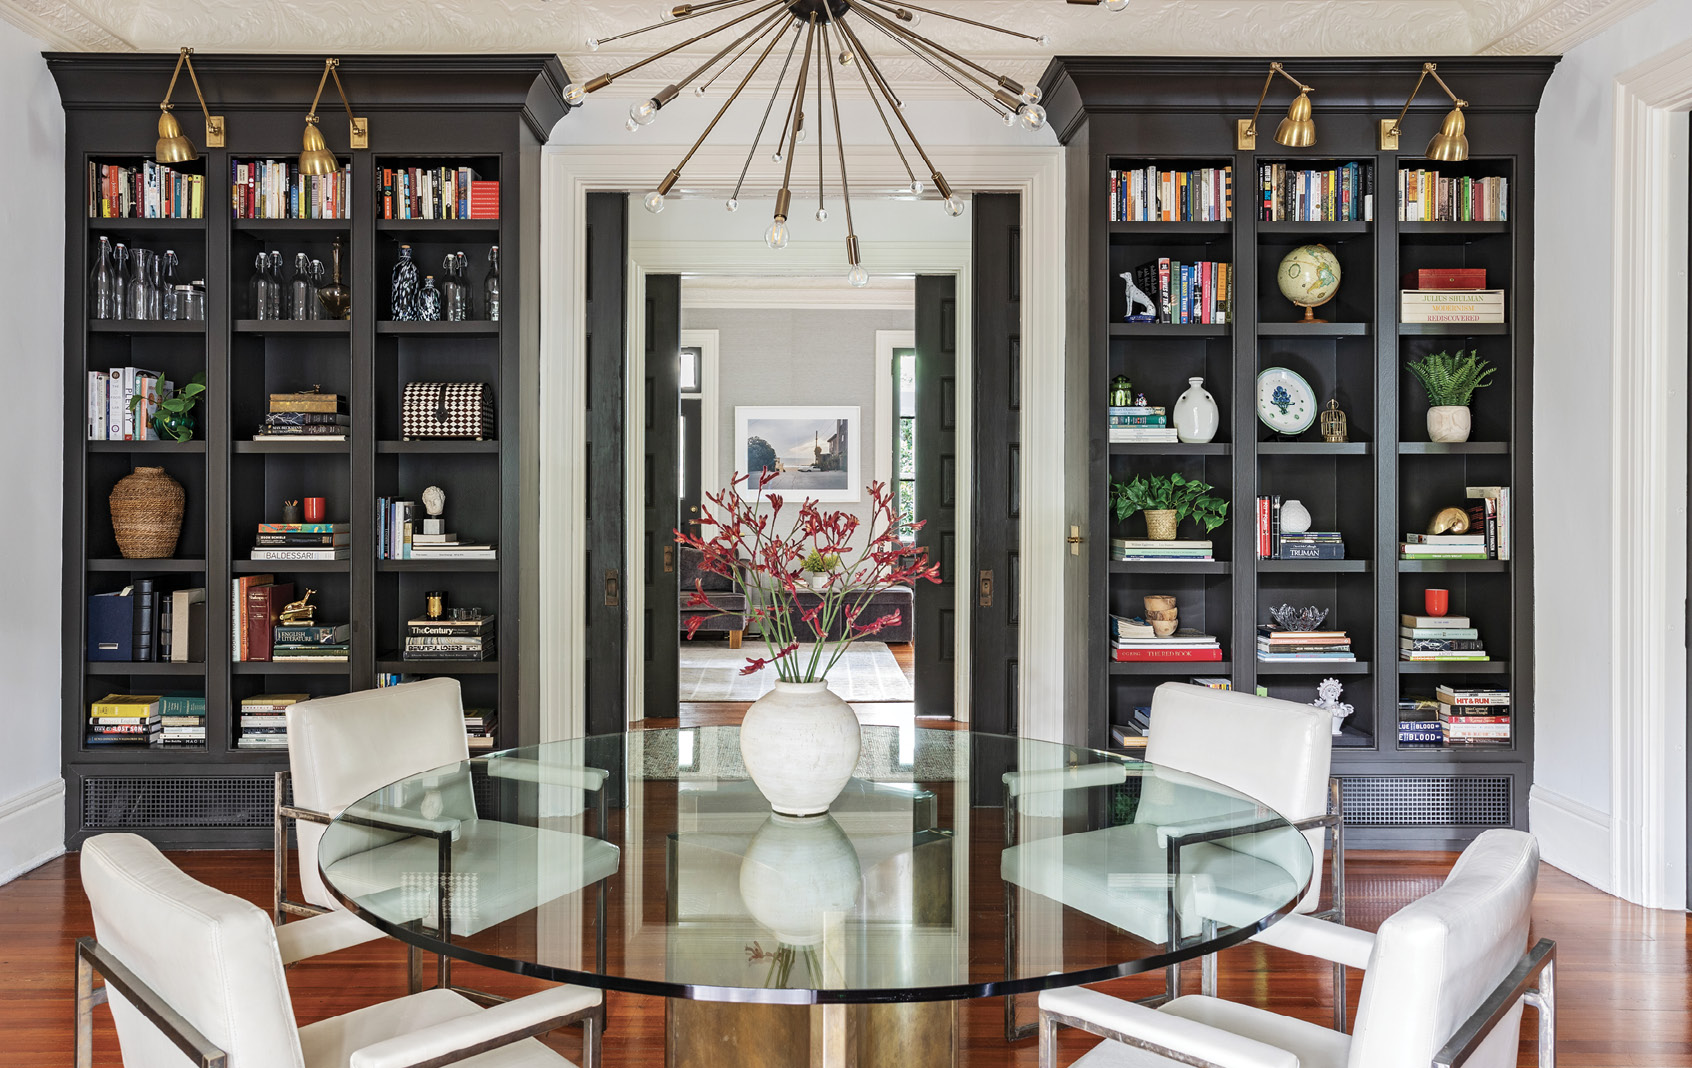 A large doorway leads to the dining room, where original built-in bookshelves, housing such gems as carved porcelain vases by local potter Maria White, frame a glass dining table atop a pair of brass Mastercraft table bases.